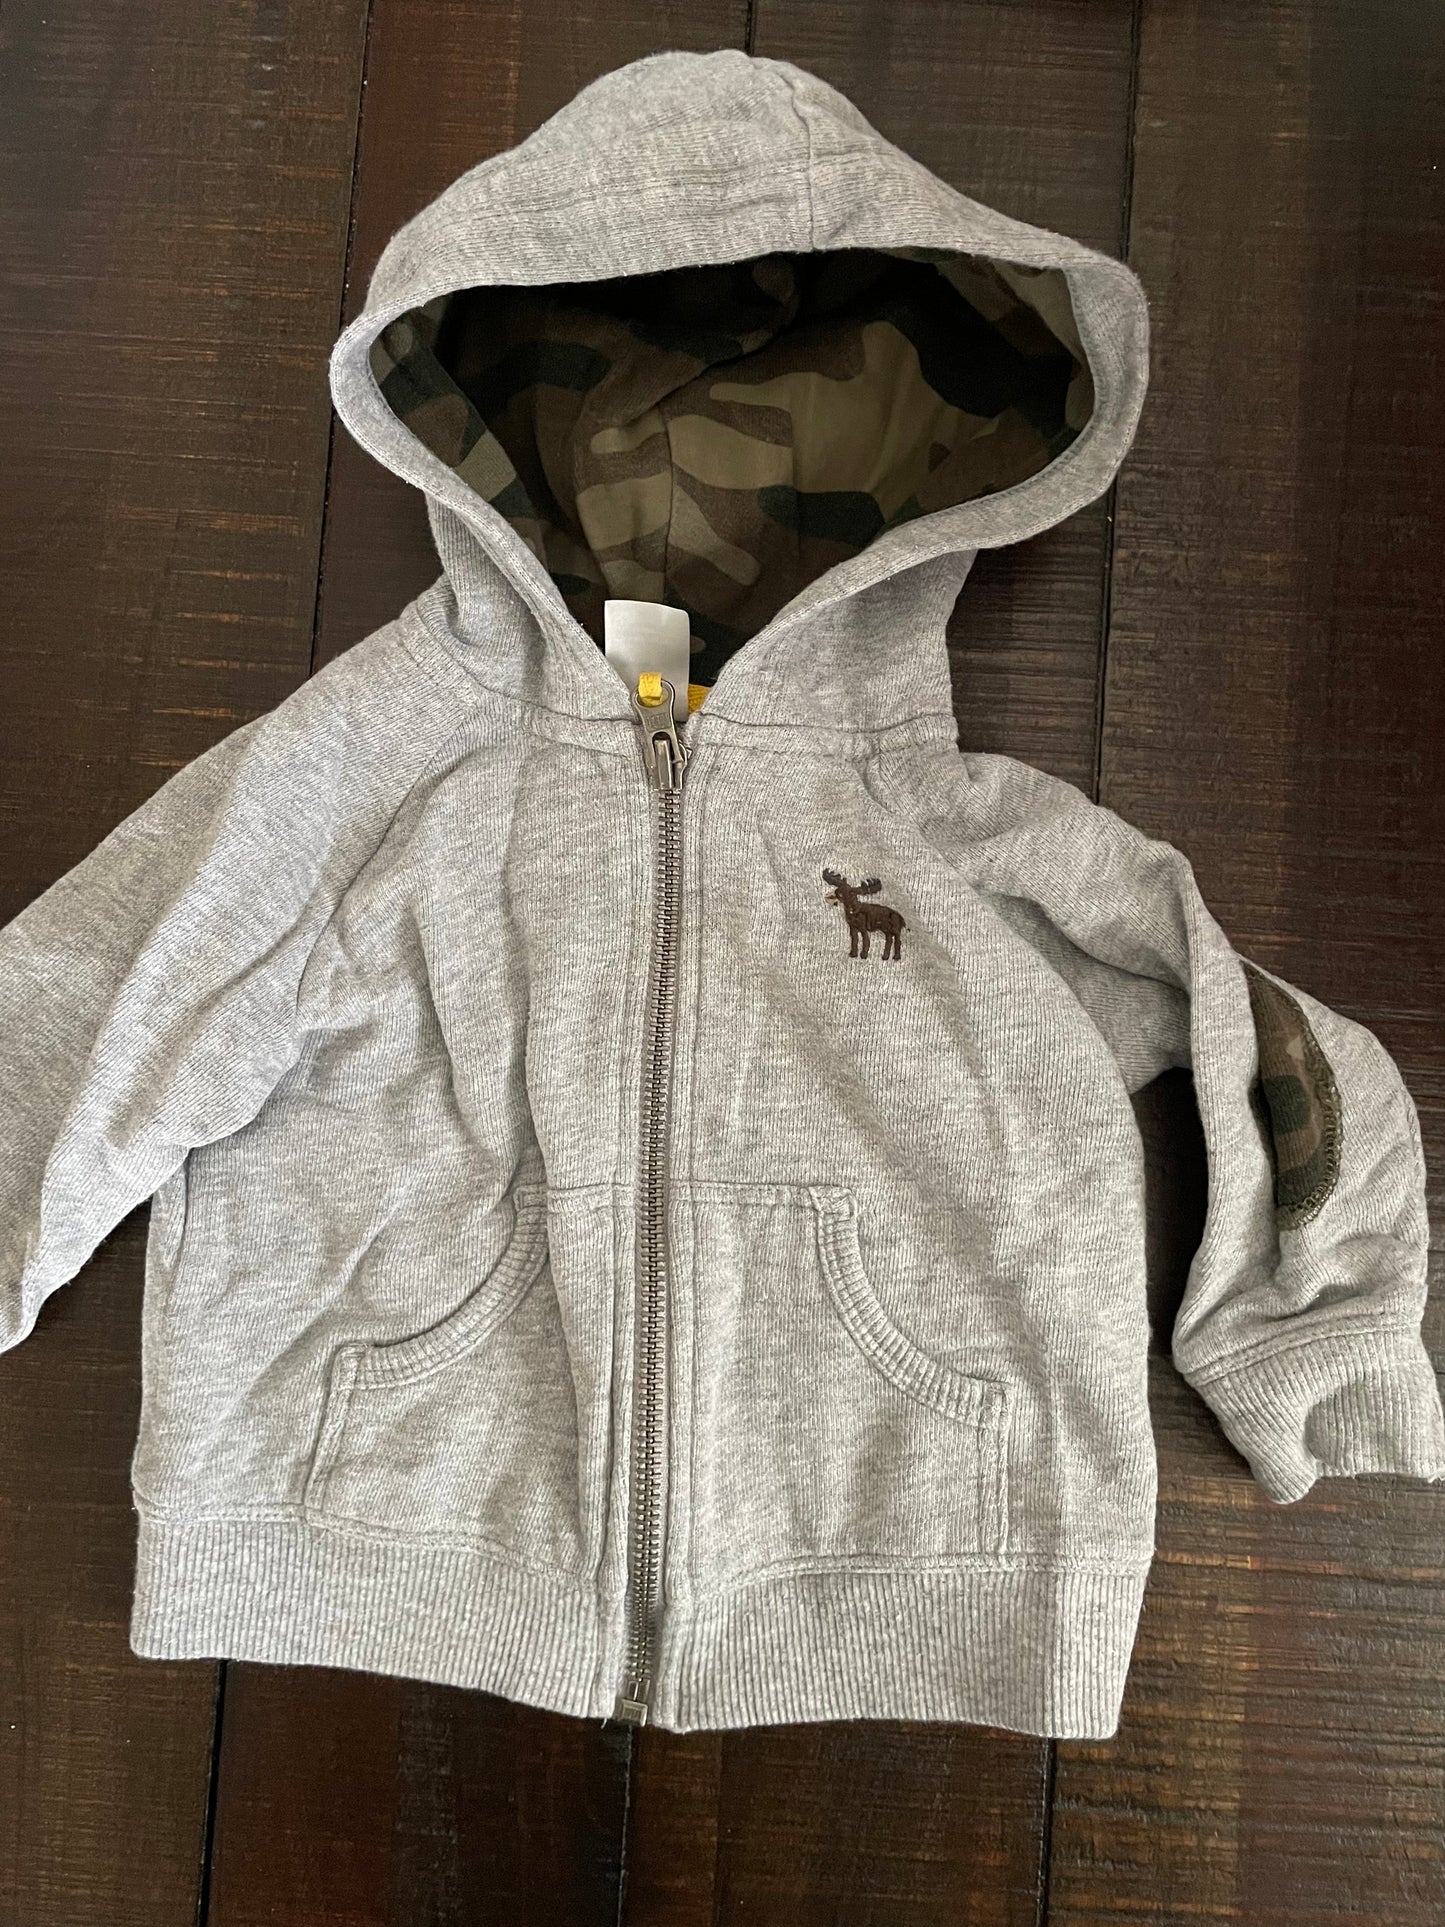 Carters 9 month hooded jacket